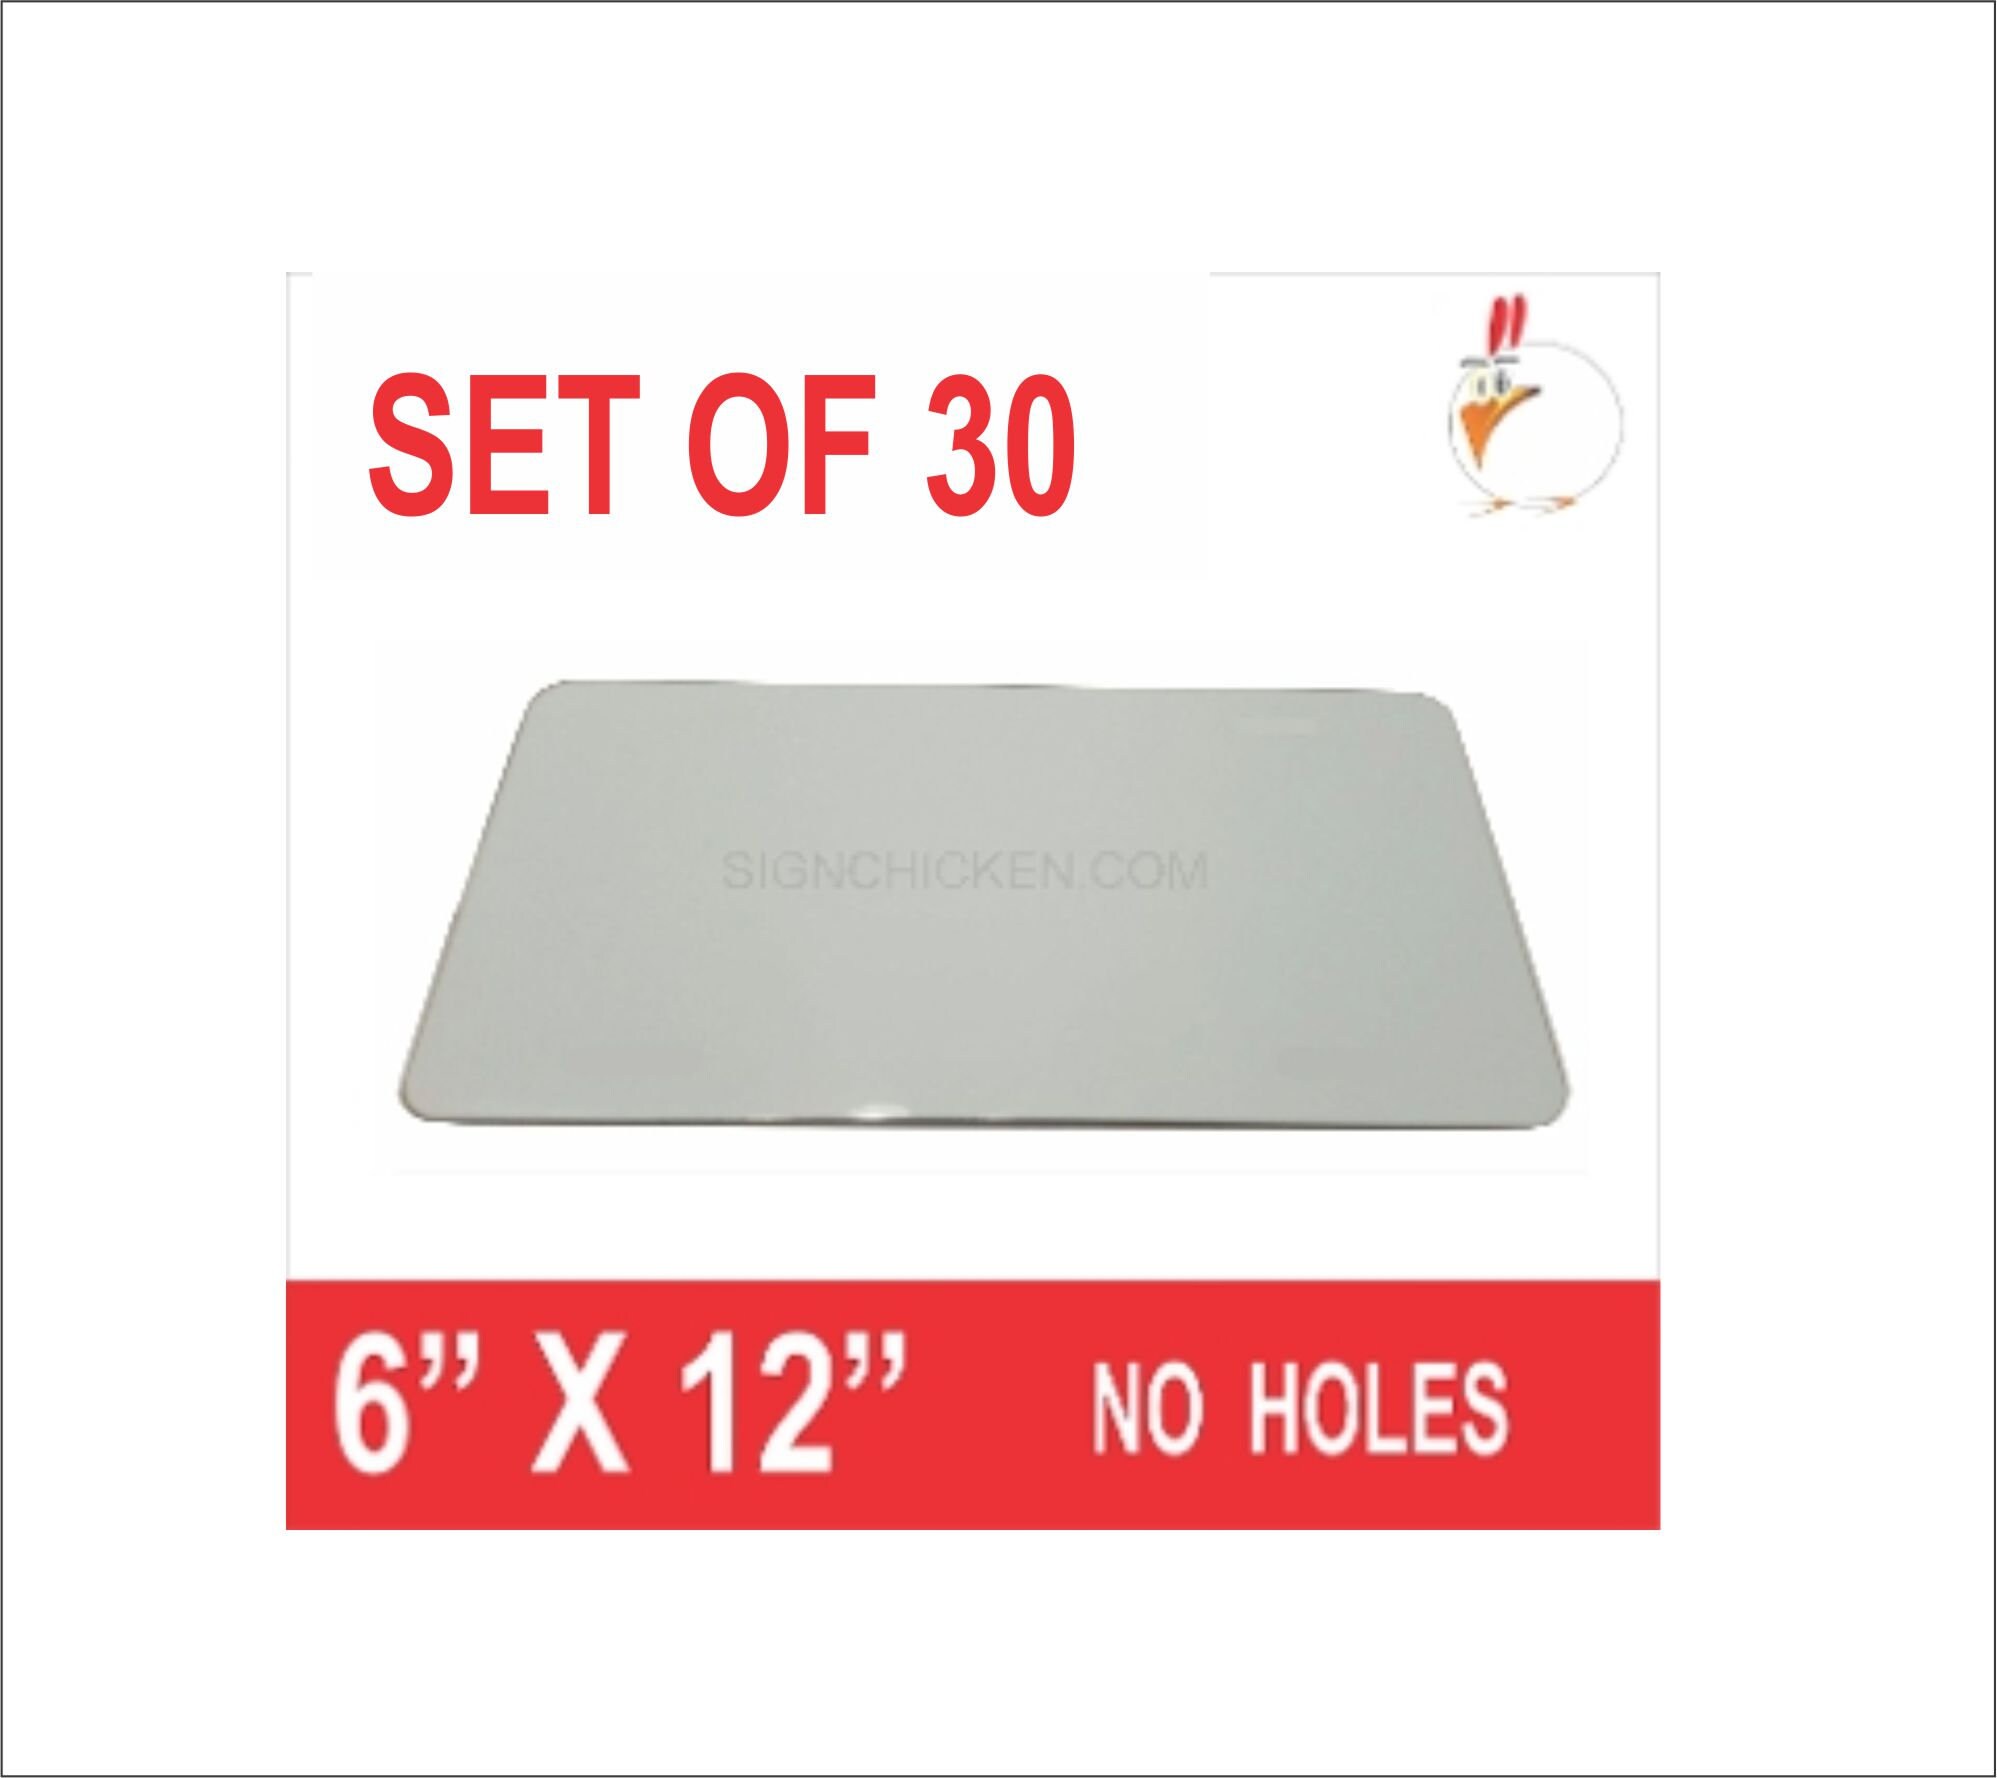 1 Piece PARKING SIGN ALUMINUM SUBLIMATION BLANKS 8 x 12 / WITH HOLES .032